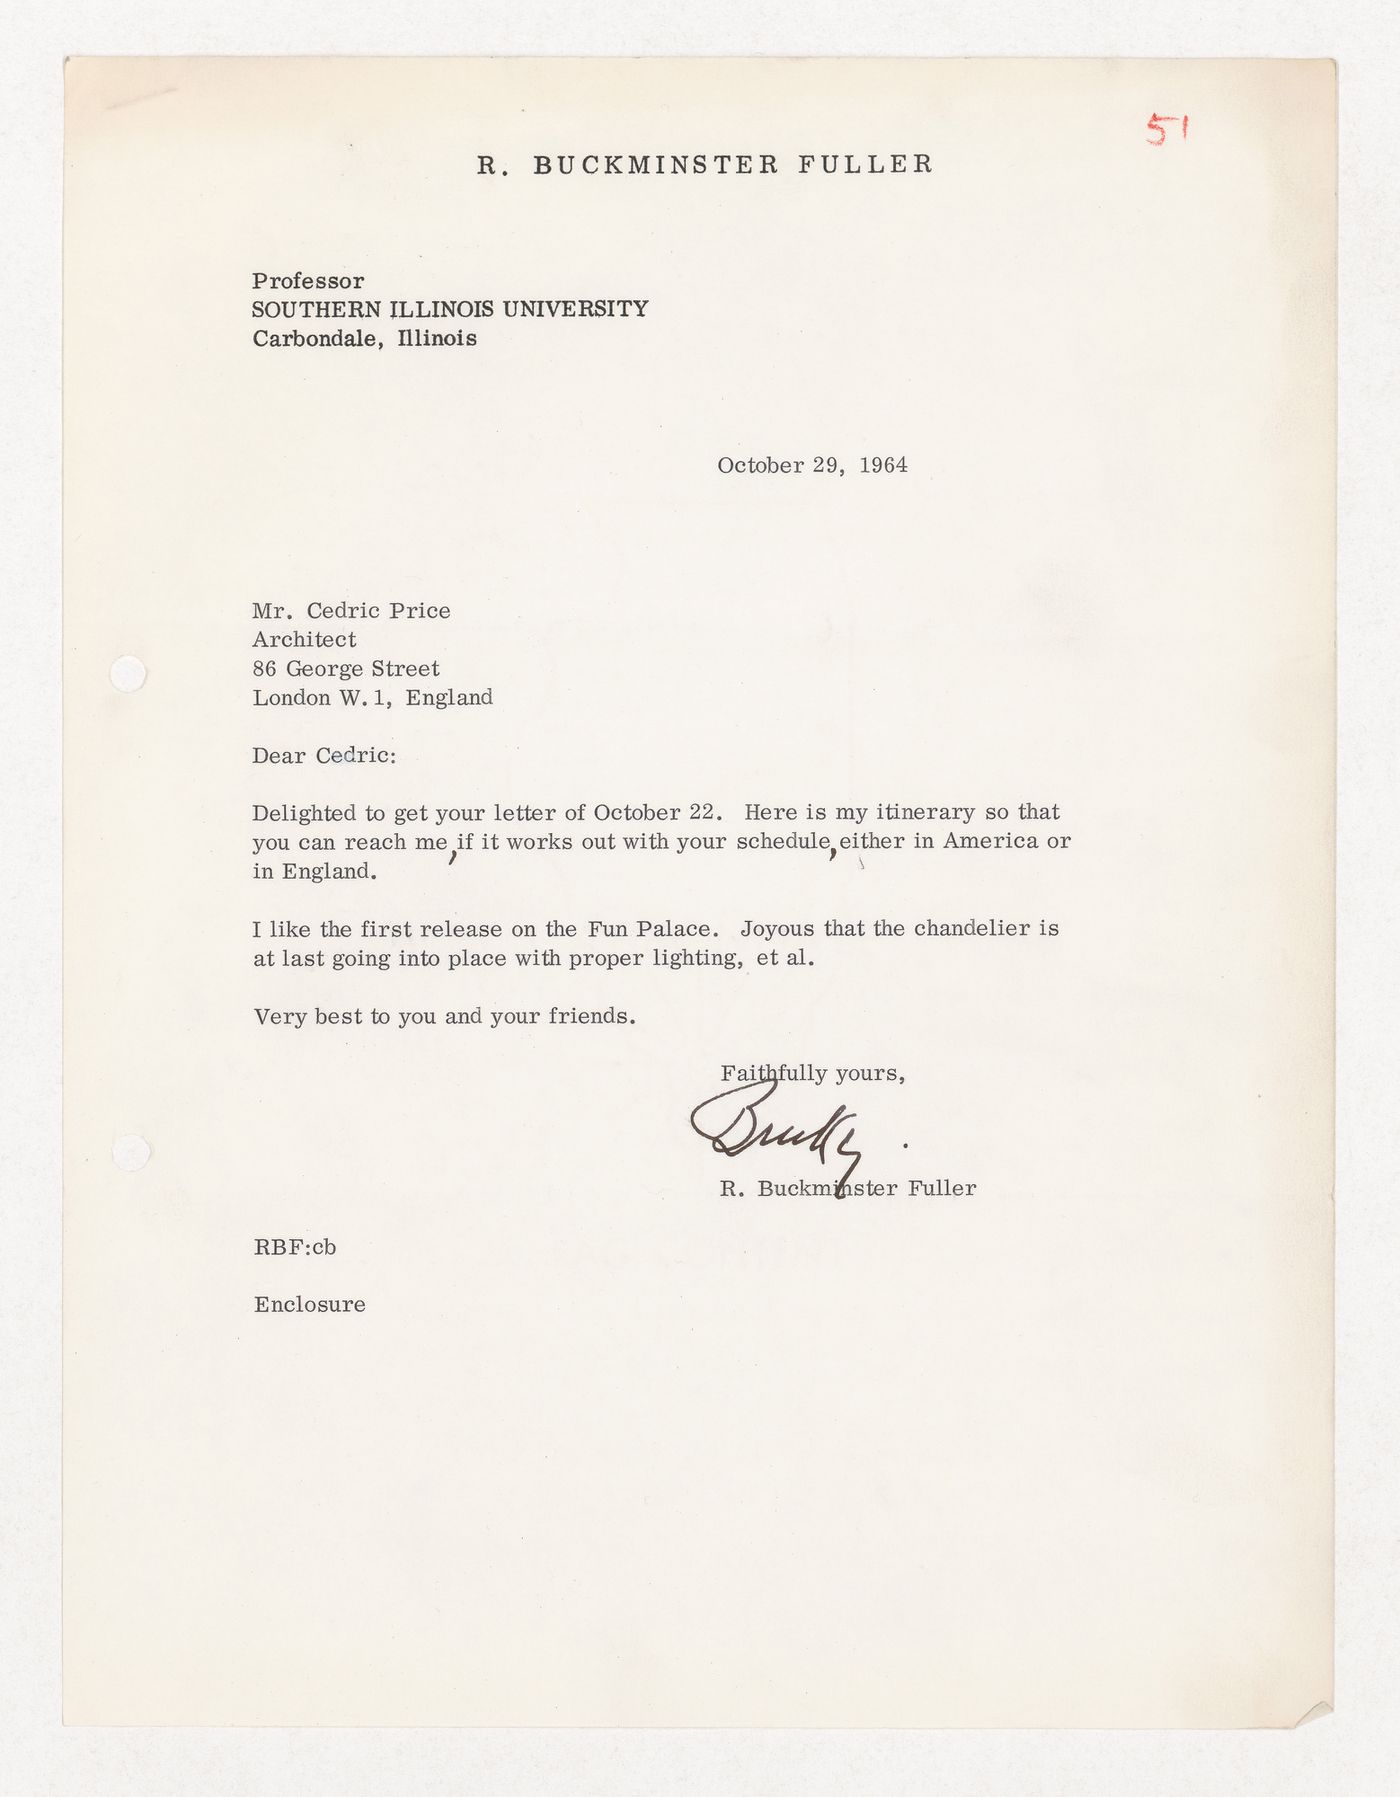 Letter from R. Buckminster Fuller to Cedric Price regarding meeting in either America or England